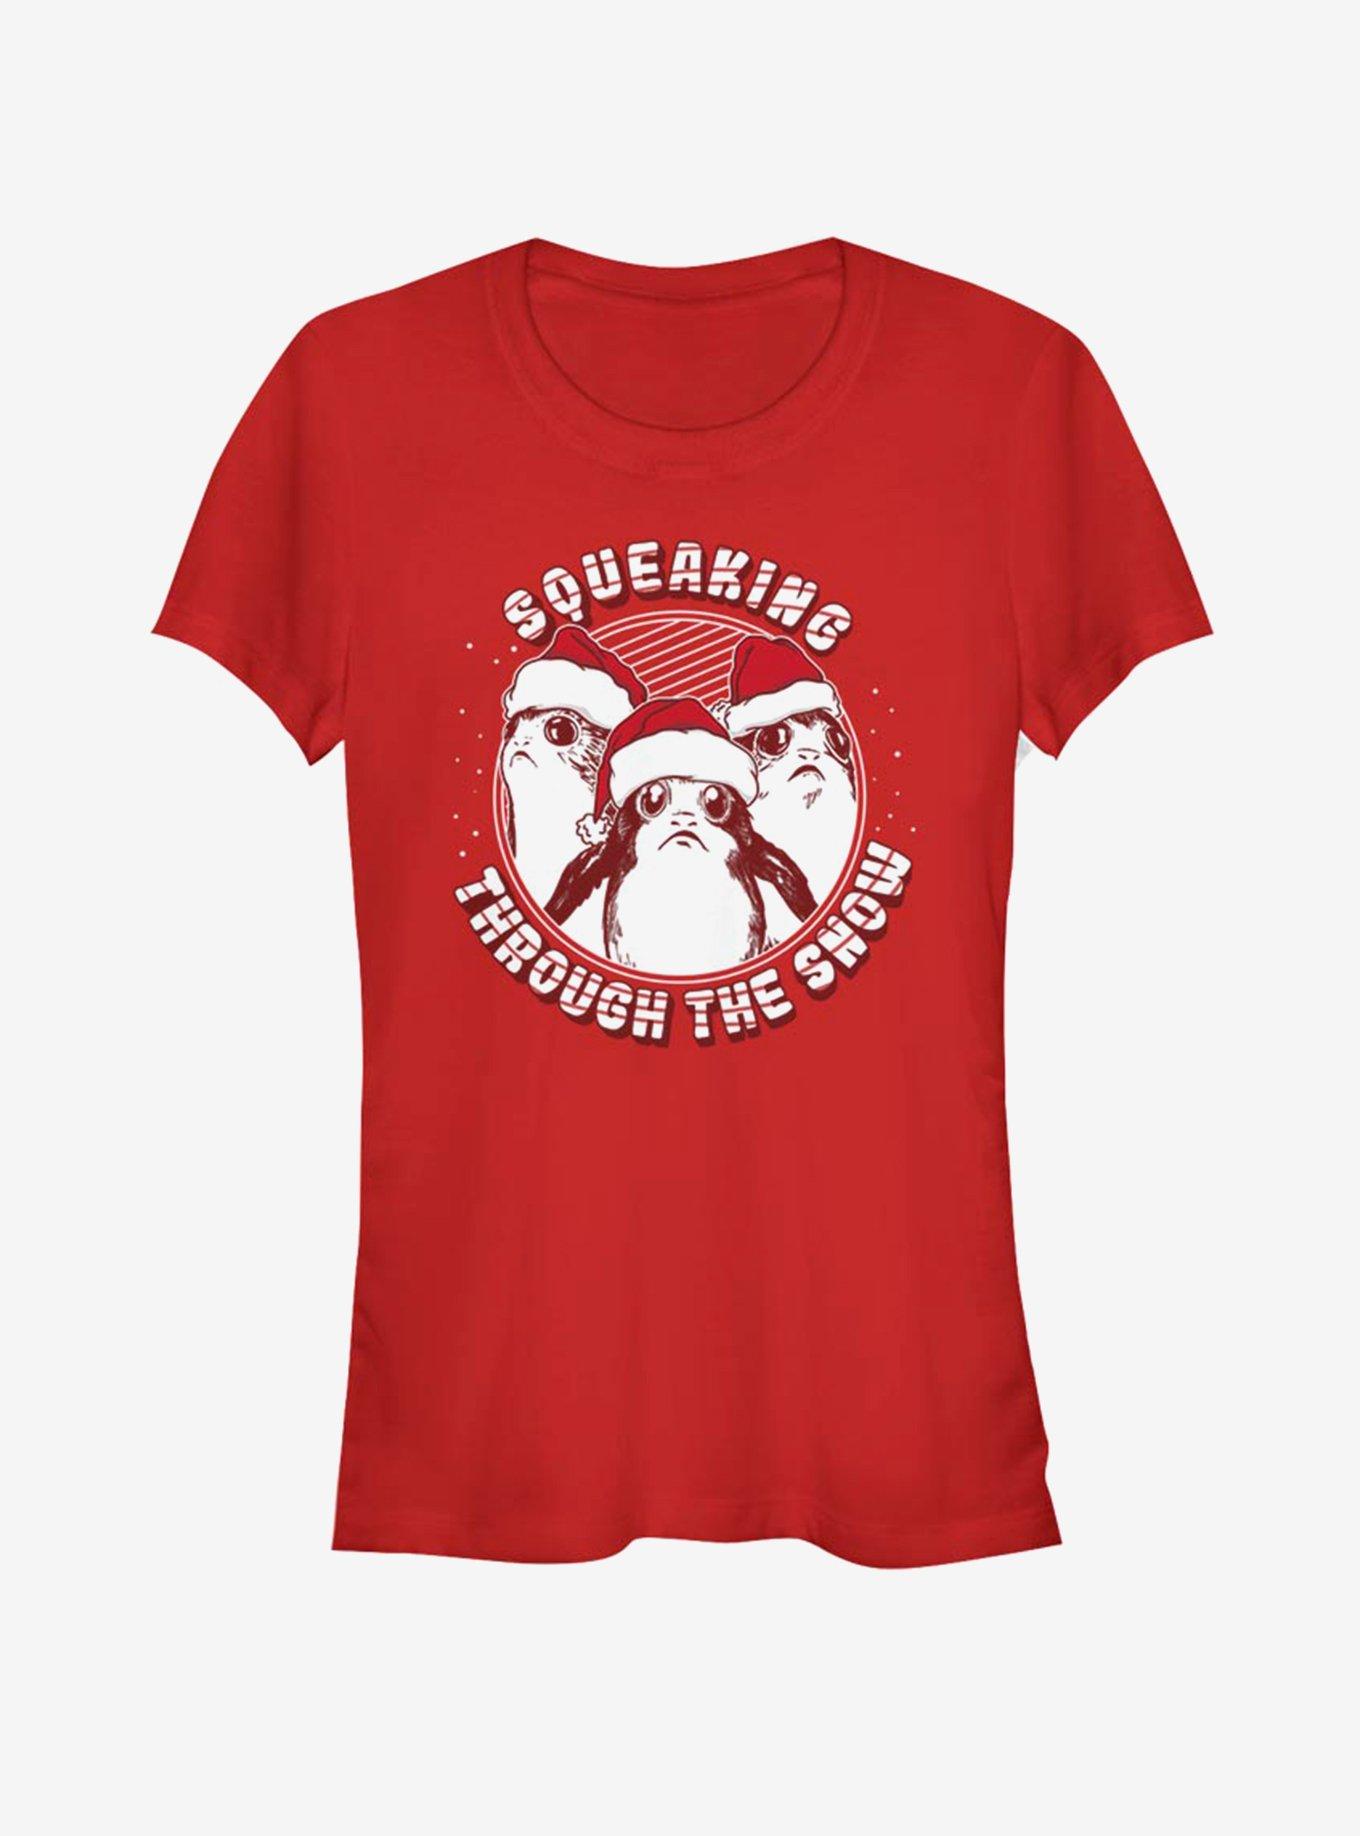 Star Wars Squeaking Through the Snow Girls T-Shirt, RED, hi-res